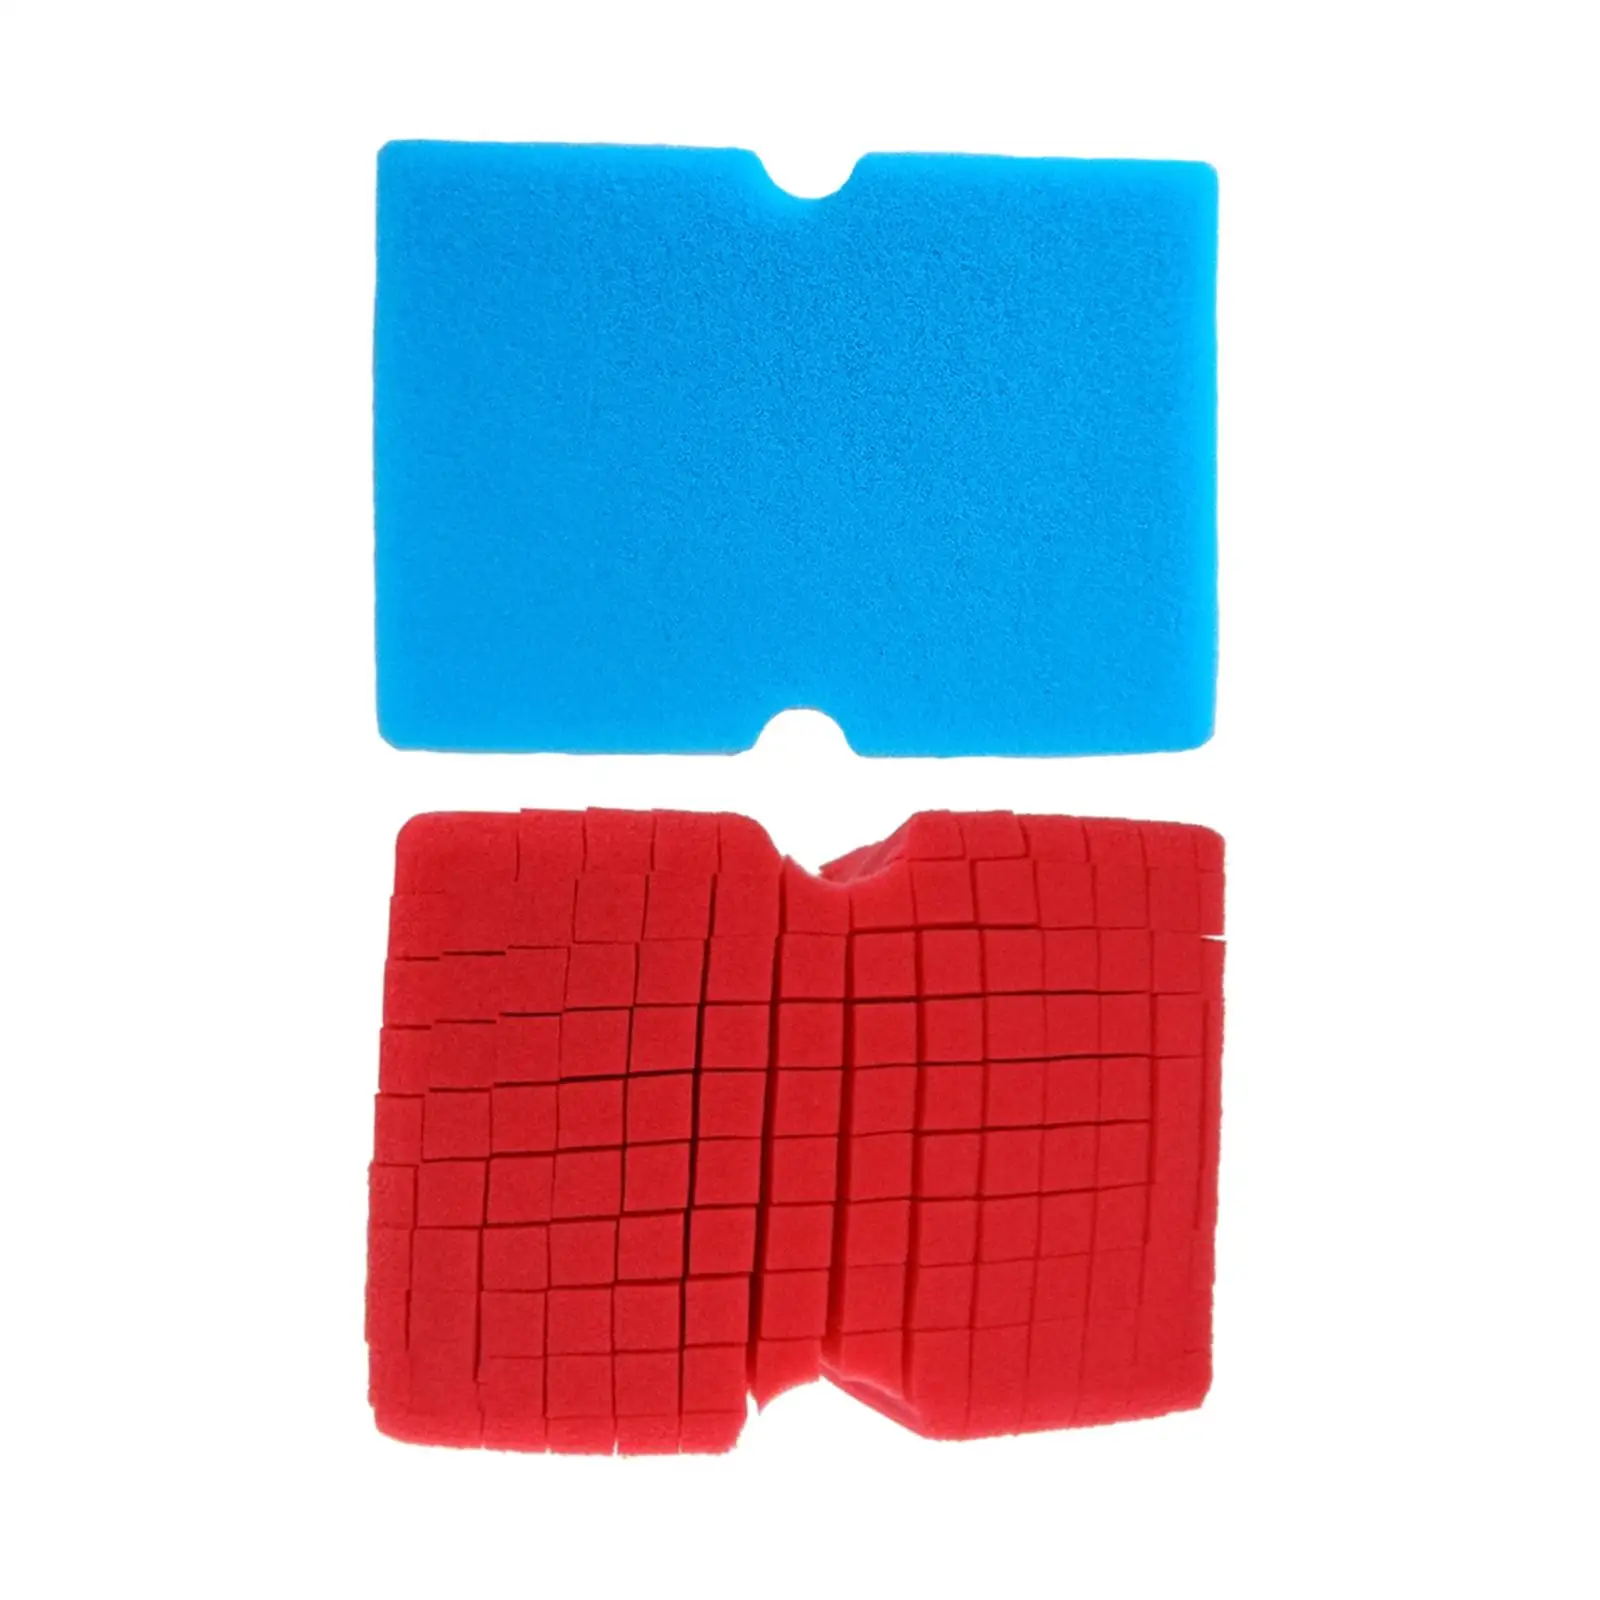 Damp Clean Duster Sponge Multifunctional Large Soft Thick Car Cleaning Accessories Car Wash Sponge for Cars Truck